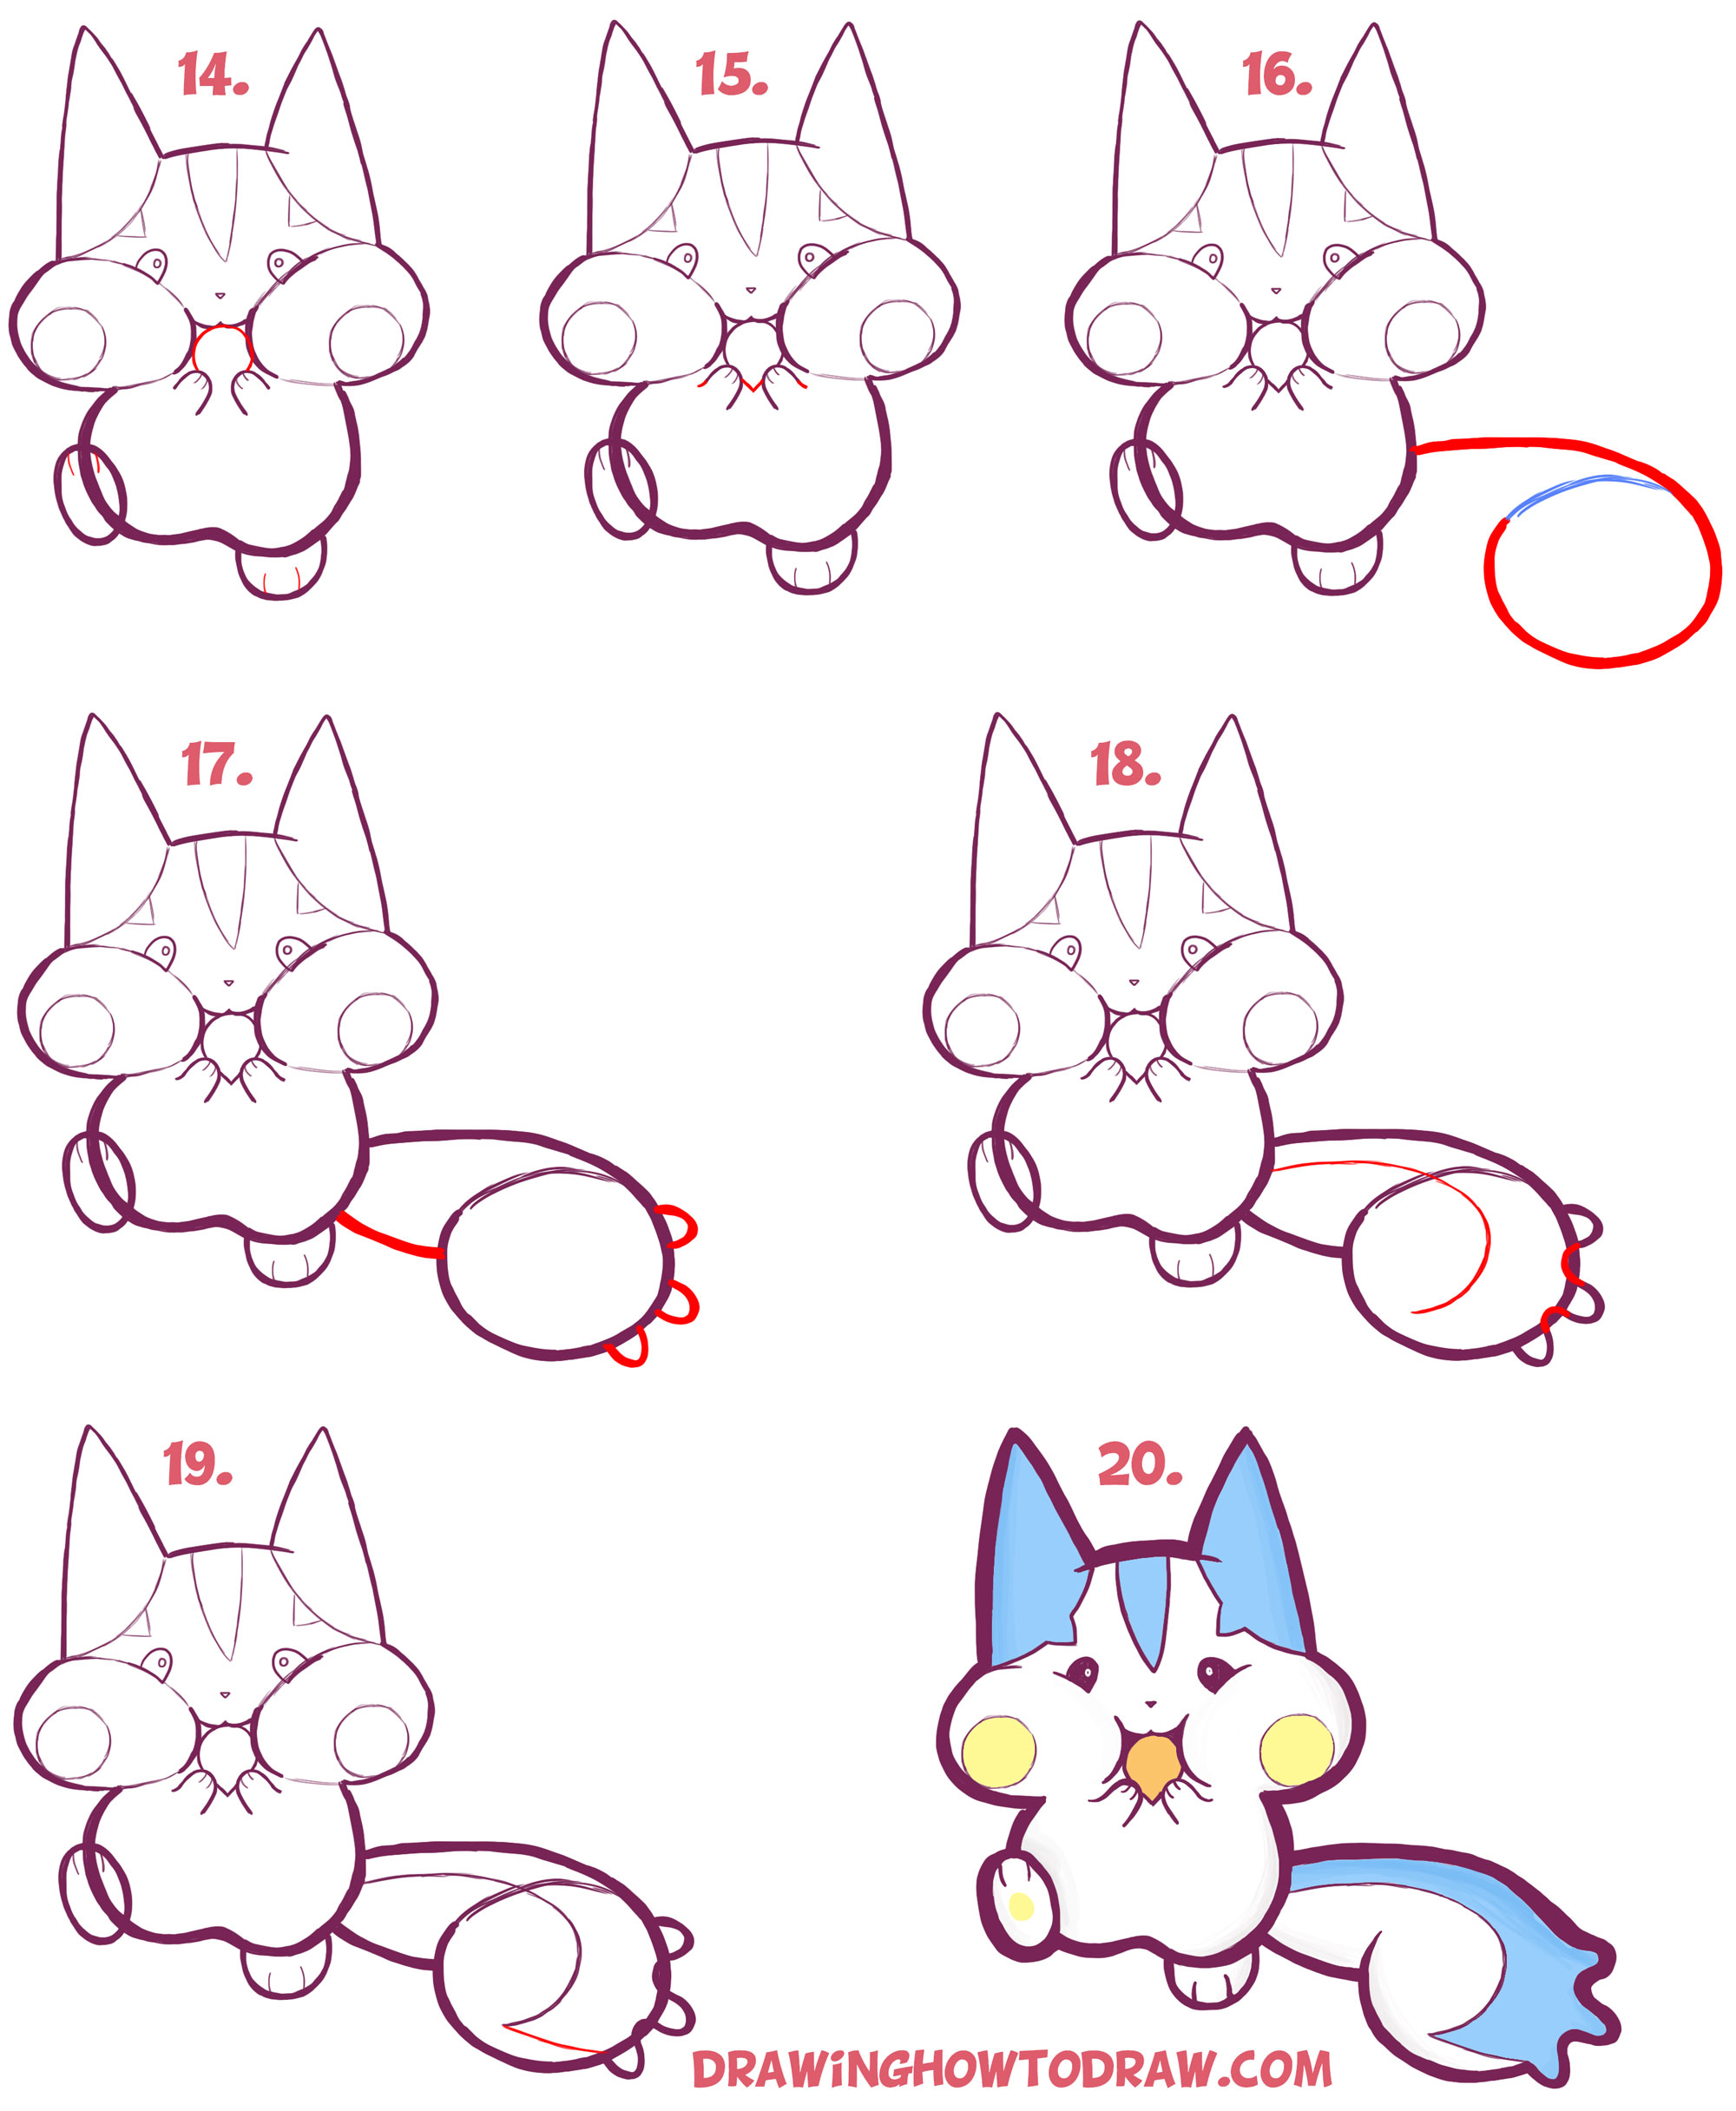 Learn How to Draw Kawaii / Chibi Pachirisu Pokemon with Simple Steps Drawing Lesson for Kids & Beginners